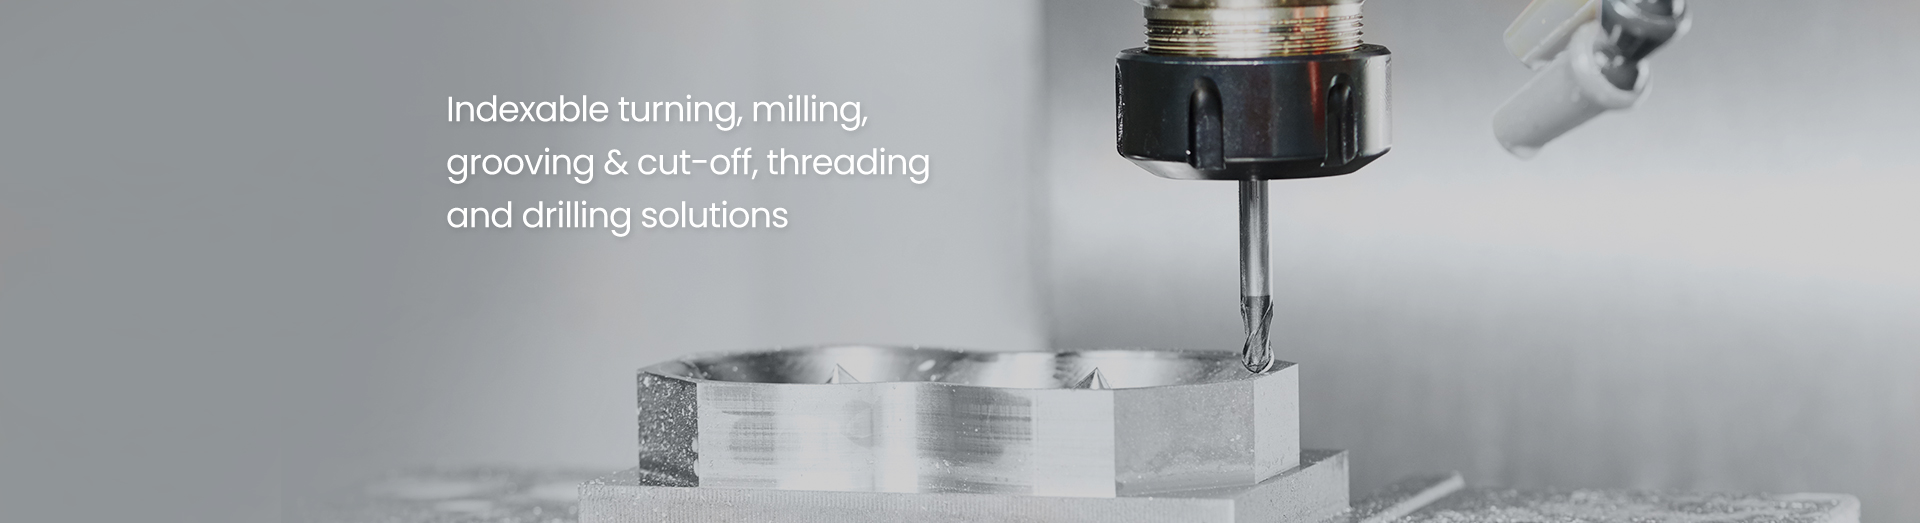 Indexable turning, milling, grooving & cut-off, threading and drilling solutions